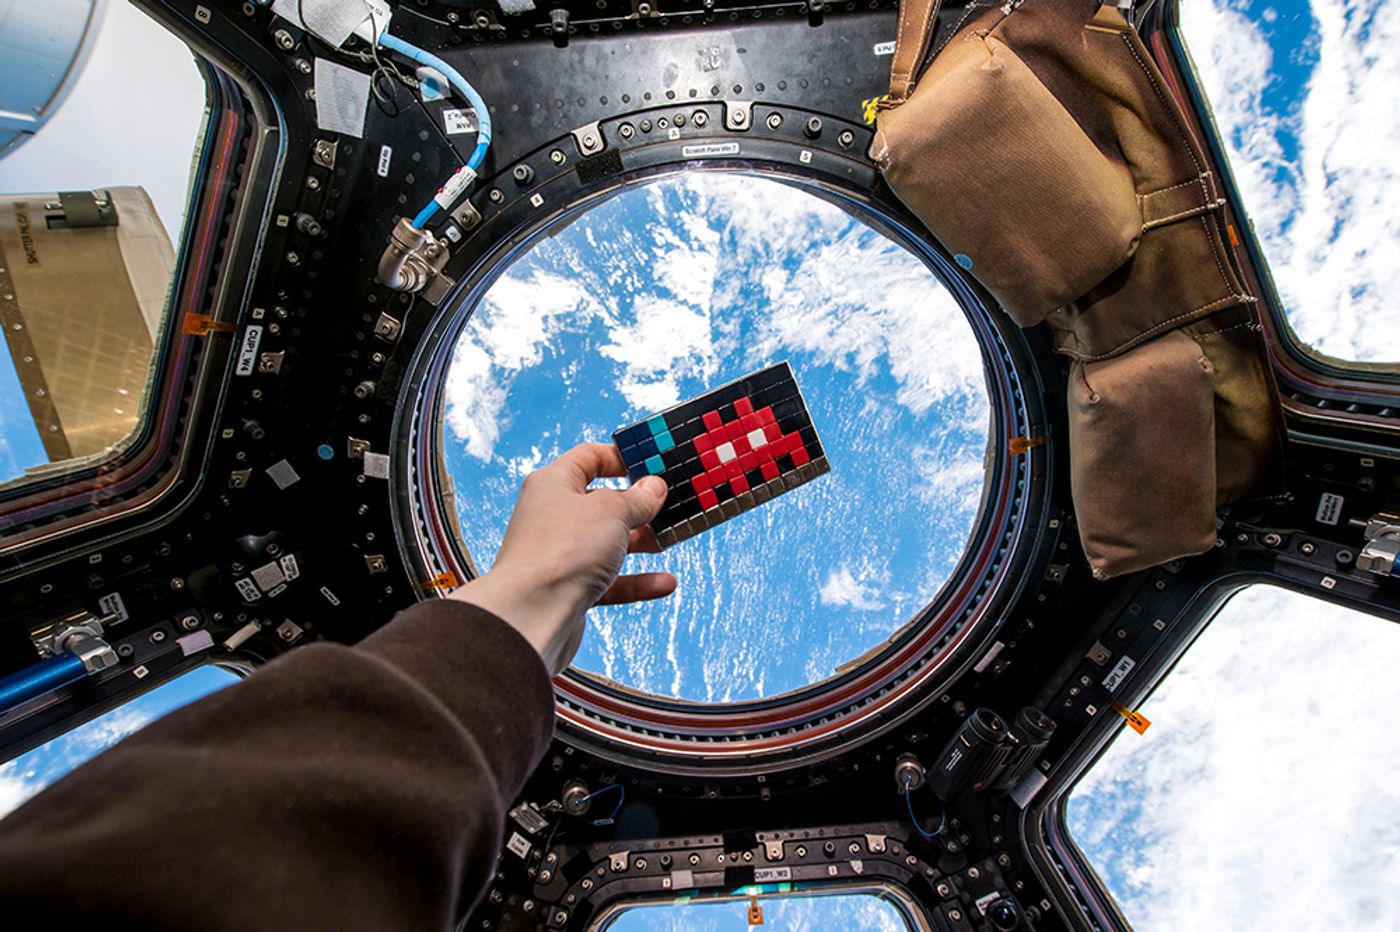 Not exactly space invaders.  Image from the ISS.